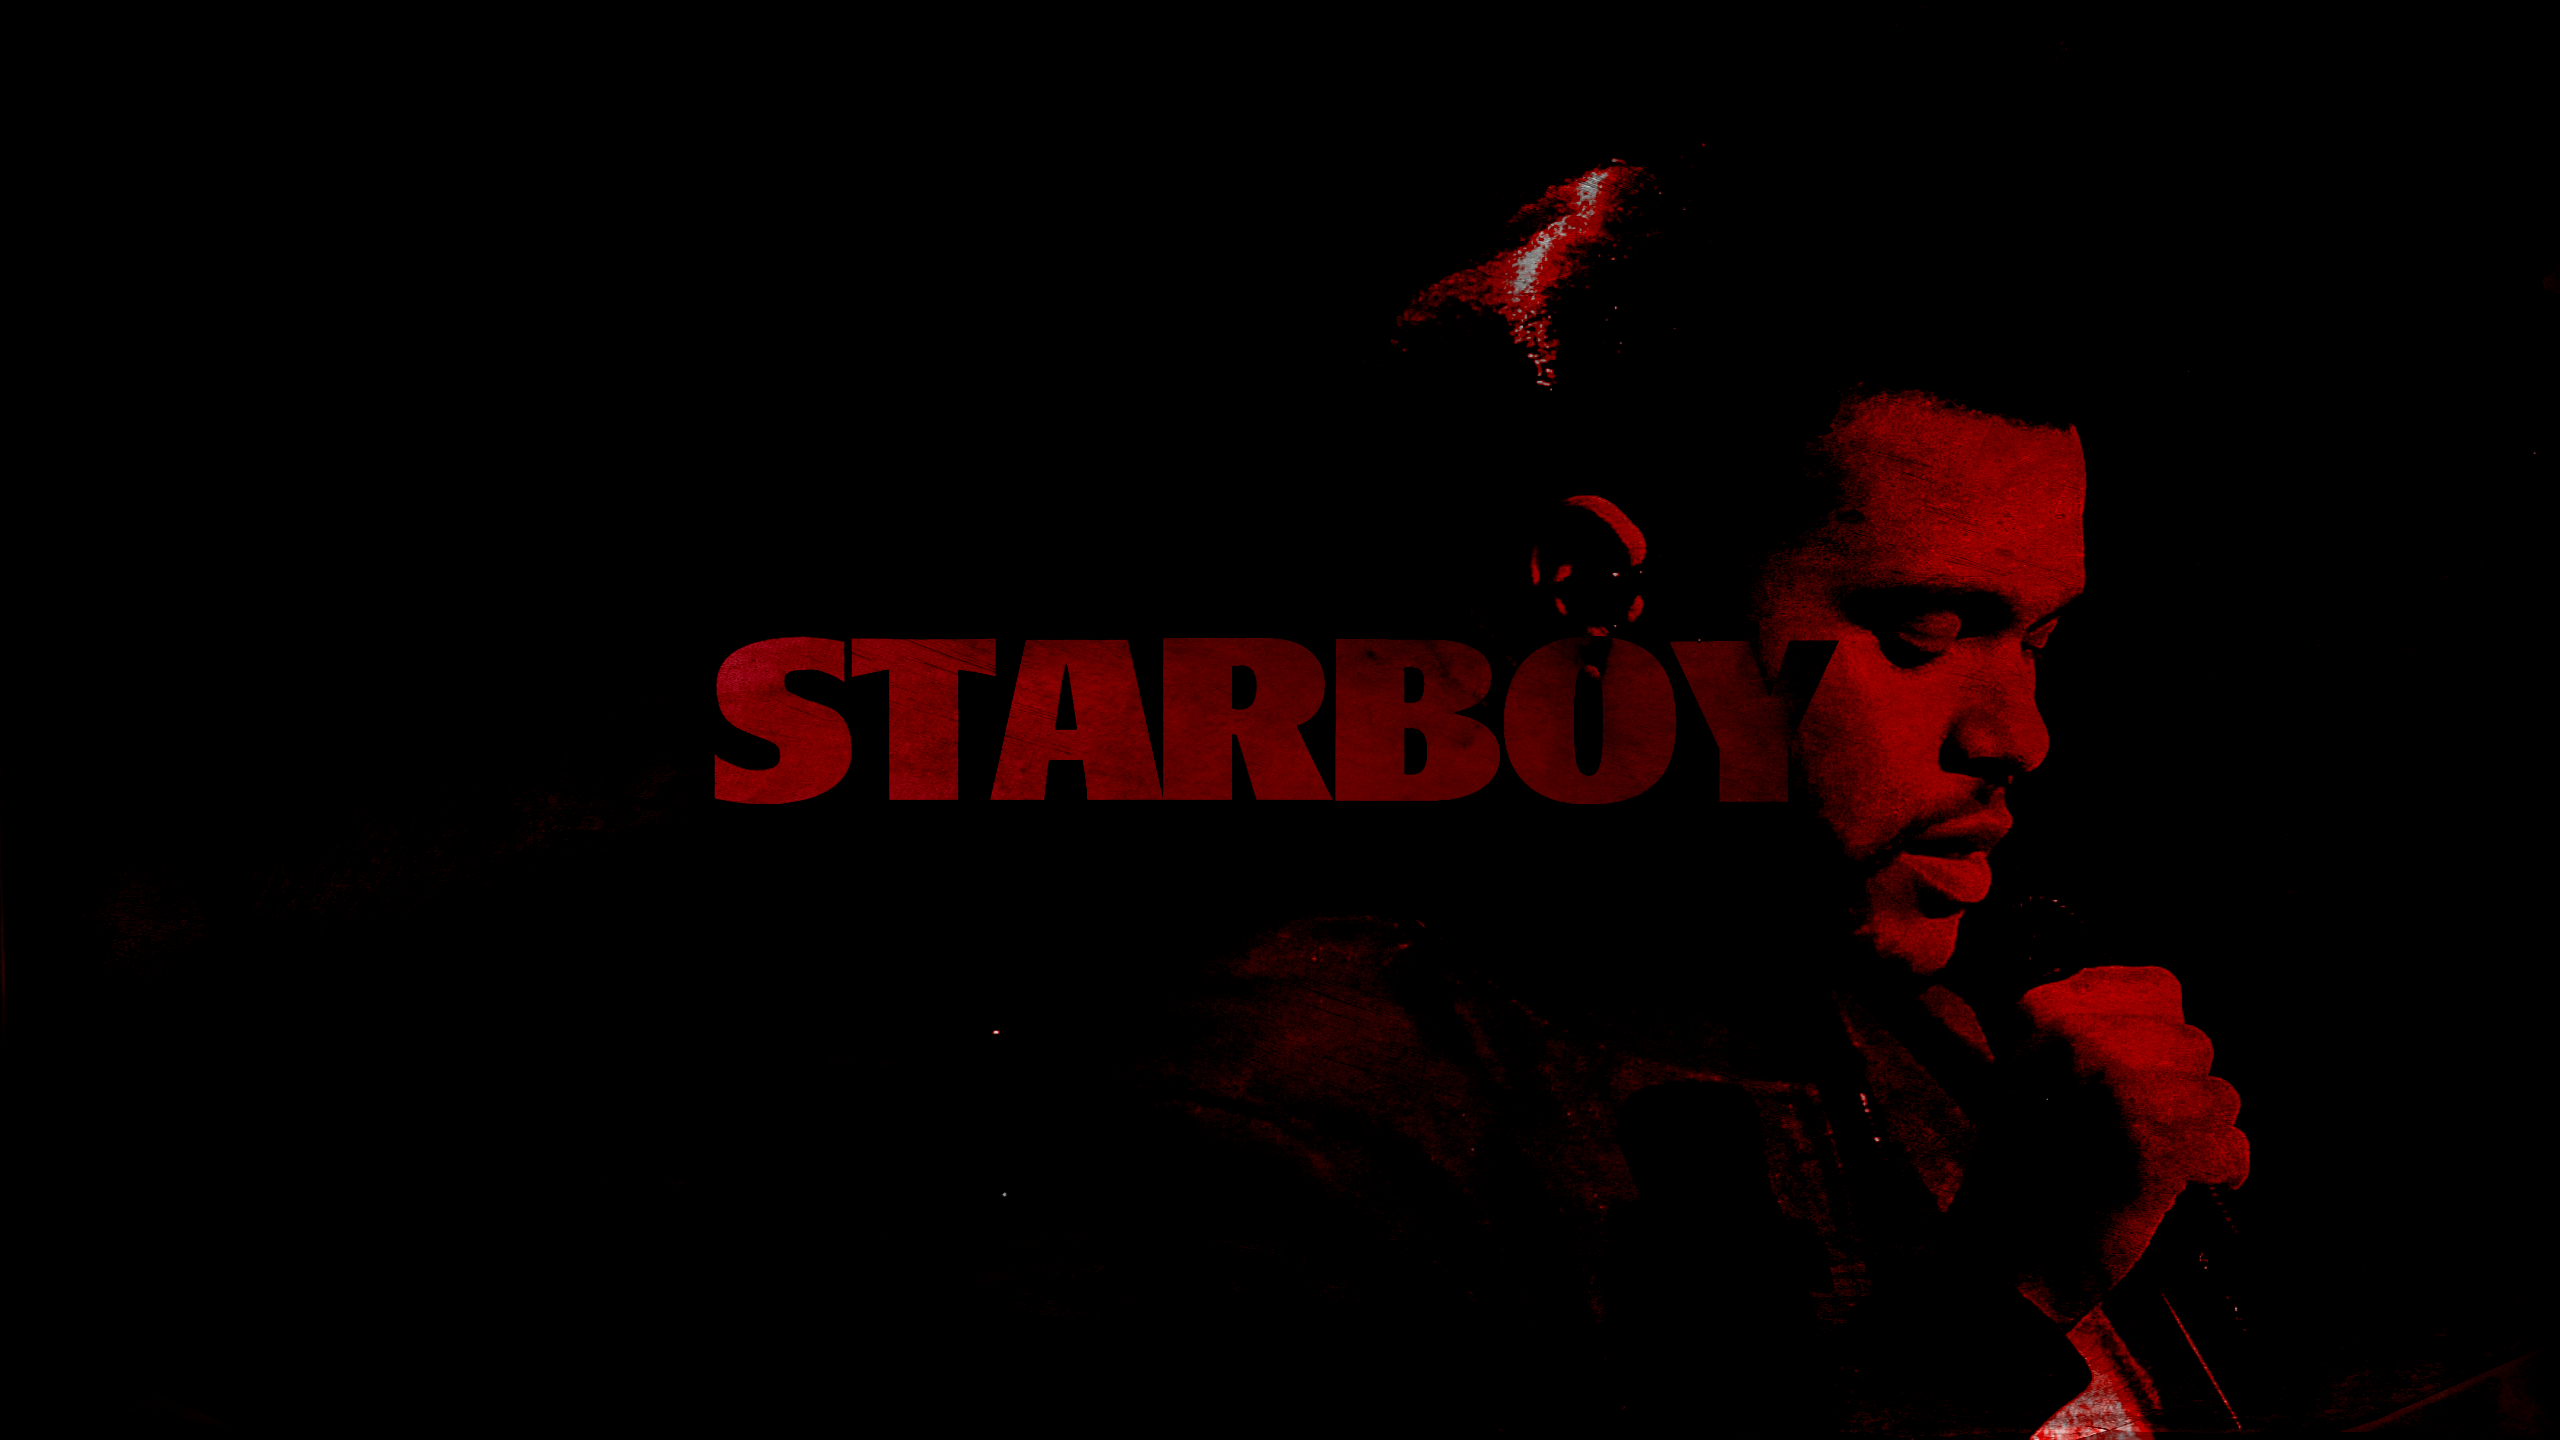 General 2560x1440 The Weeknd XO starboy singer men simple background low light